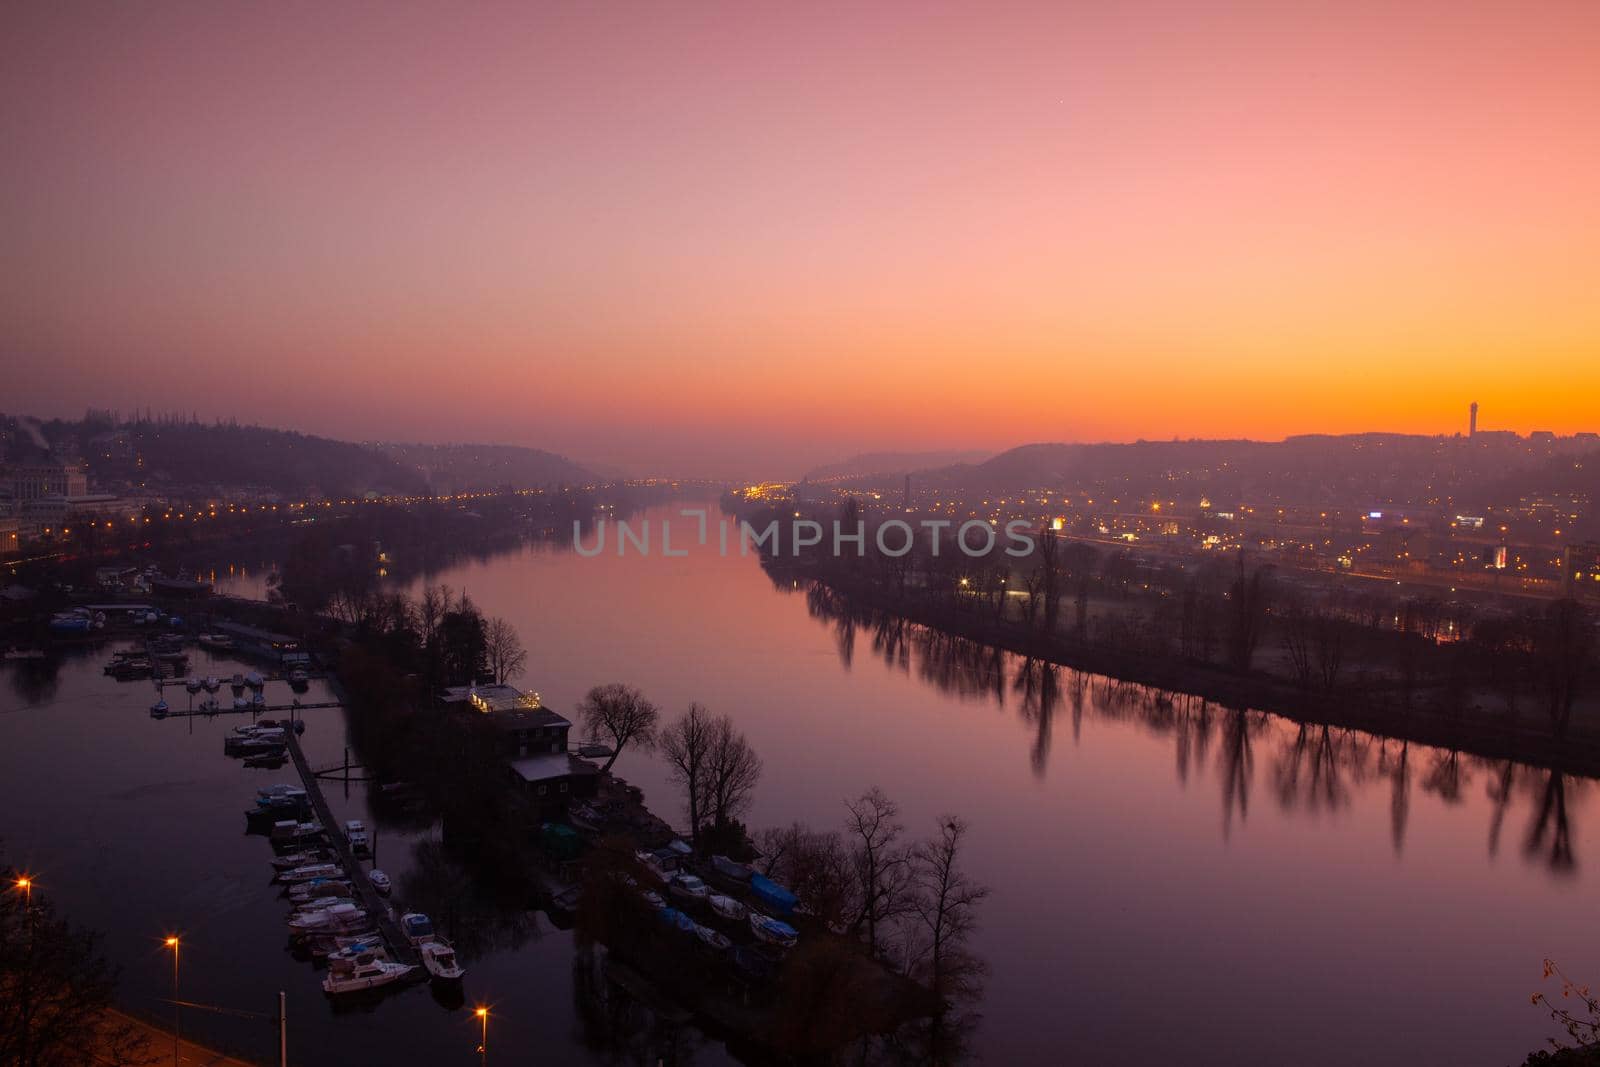 Small dock, boats and Vltava River in Prague, Czech Republic, viewed from the Vysehrad fort in the dramatic sunset.